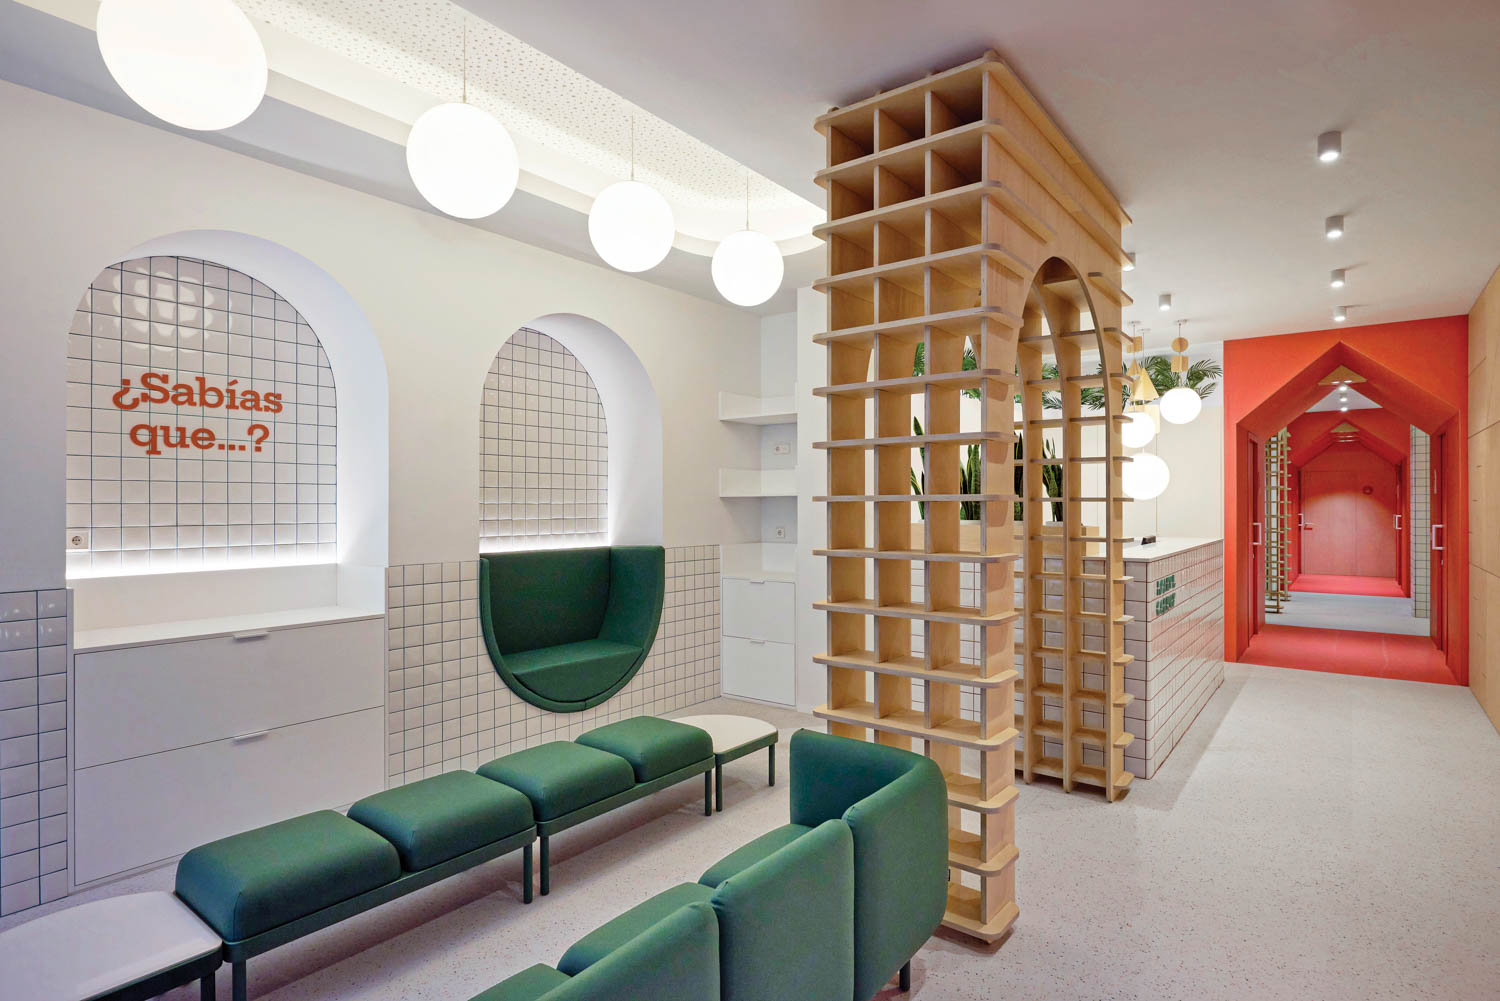 Interlocking plywood pieces form a custom arch in reception, part of the project’s learning-based theme (child-centered reading materials are stored beneath the ¿Sabías que…? mural, which translates to Did you know?).